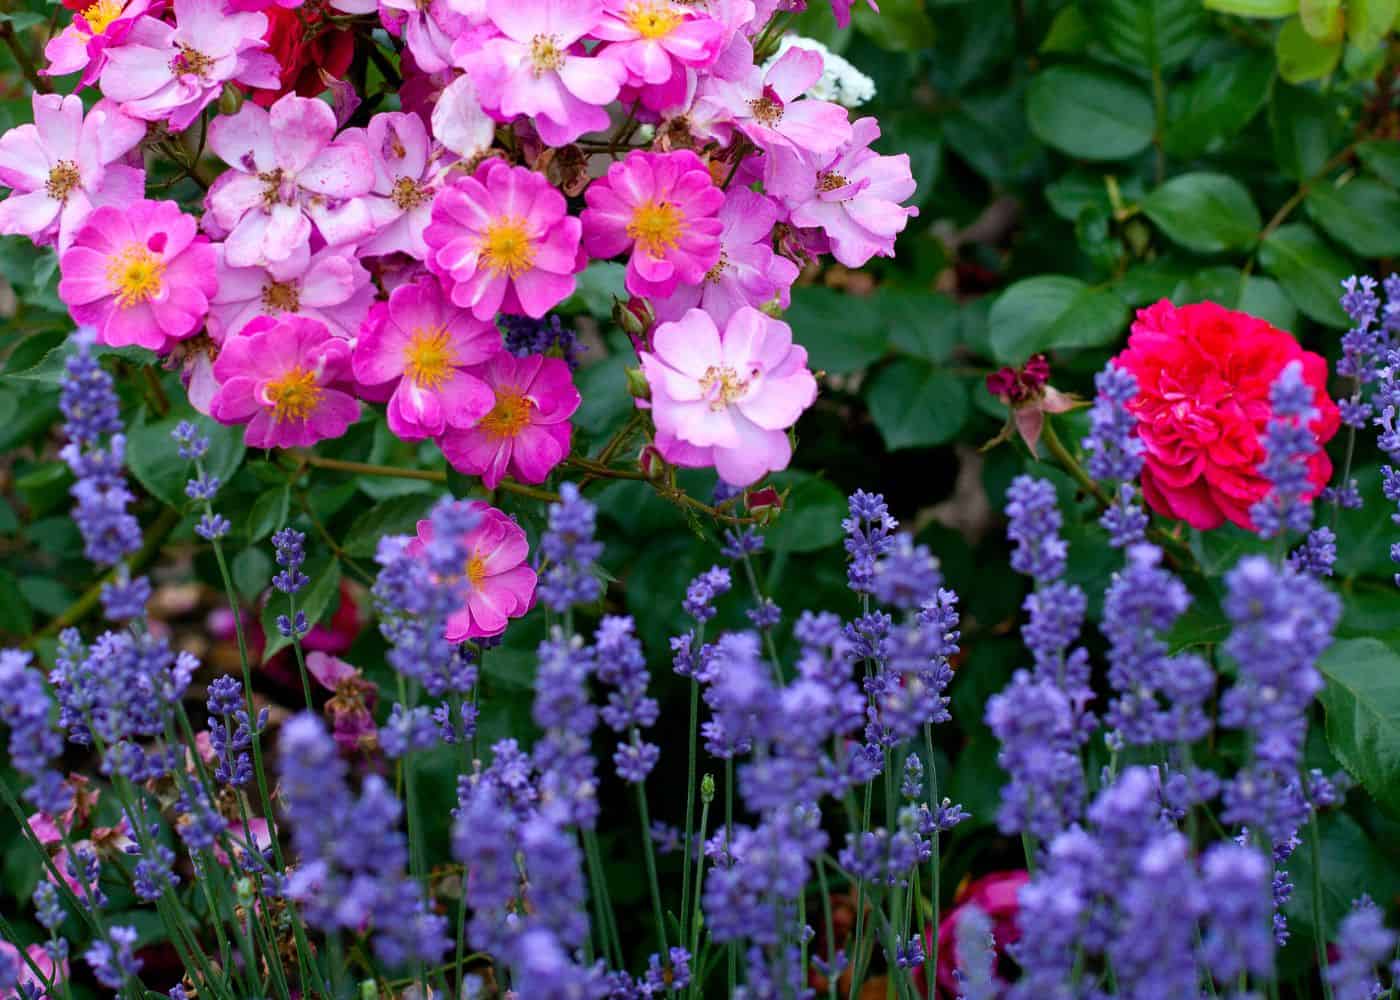 Roses as companion plants for lavender